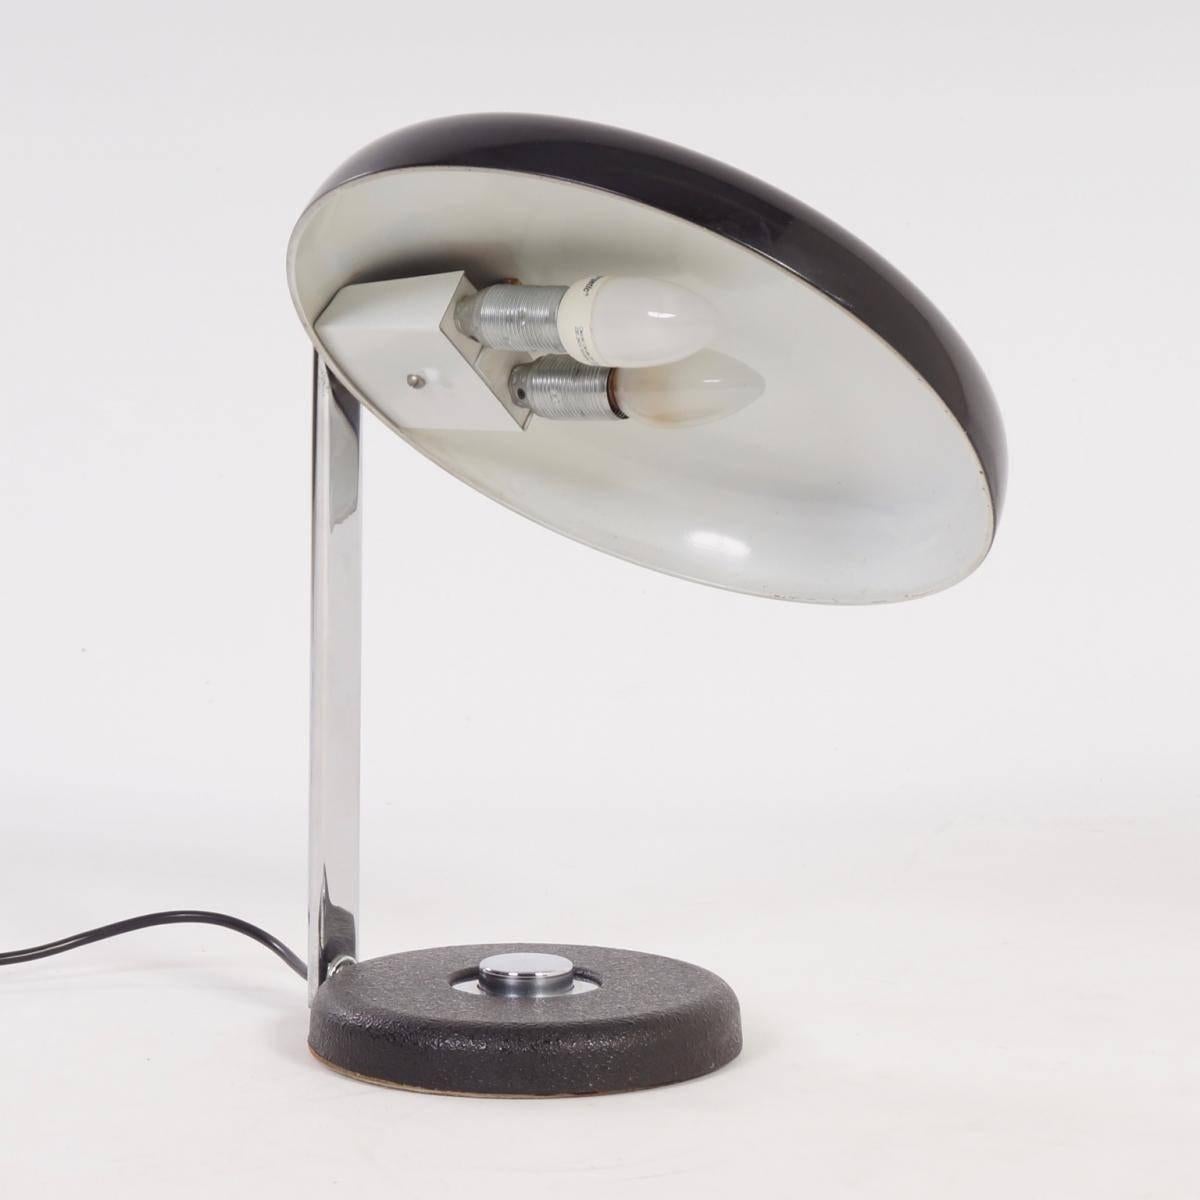 Pair of Oslo desk lamps by Heinz Pfaender from Hillebrand from 1962. You can swivel and focus the hood of this desk lamp (see pictures). Striking on the lamps of Hillebrand is the good quality and the push button in the middle of the foot. The lamp